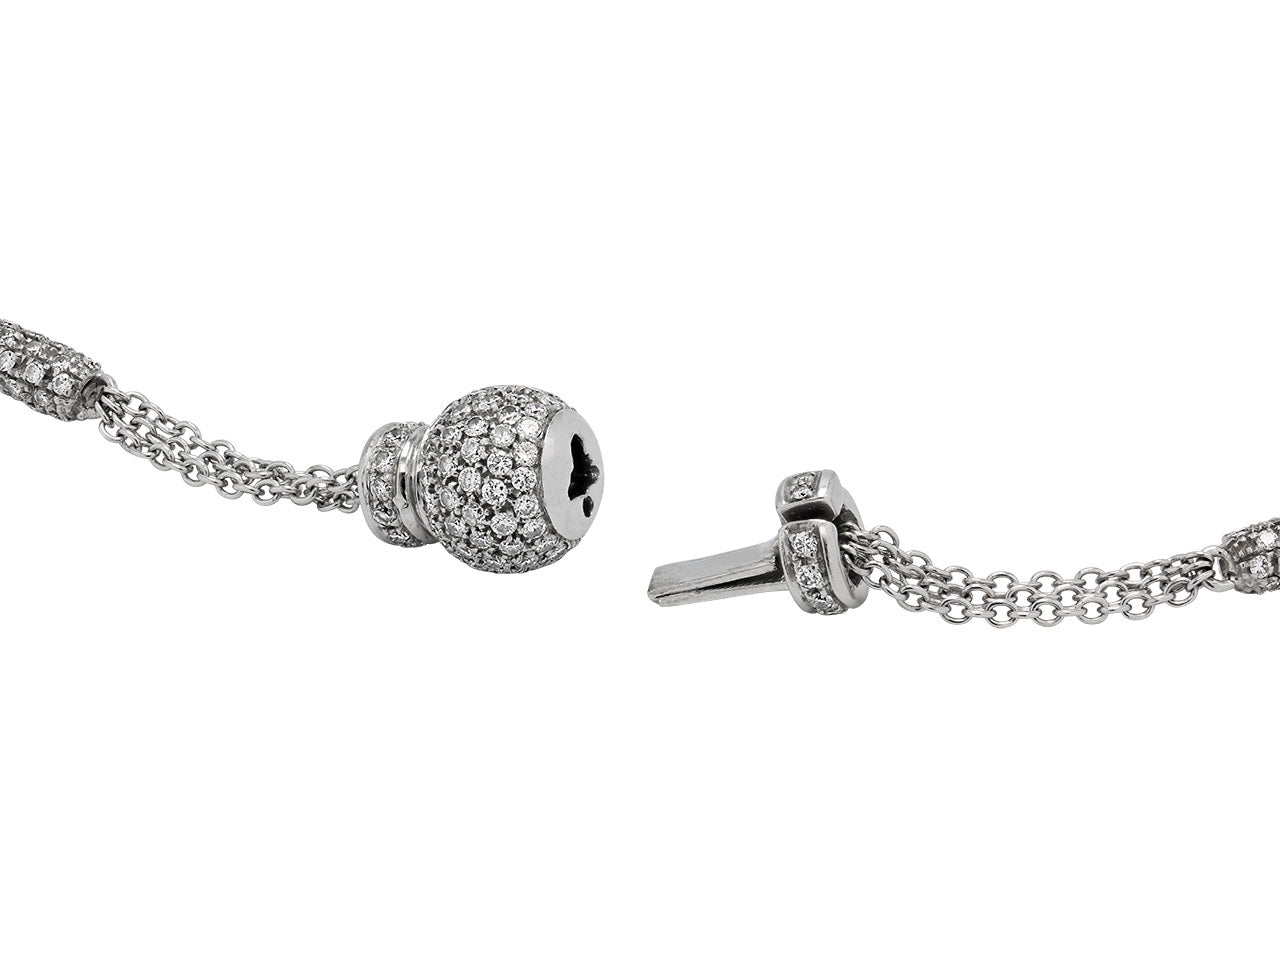 Diamond and Pearl Necklace in 18K White Gold